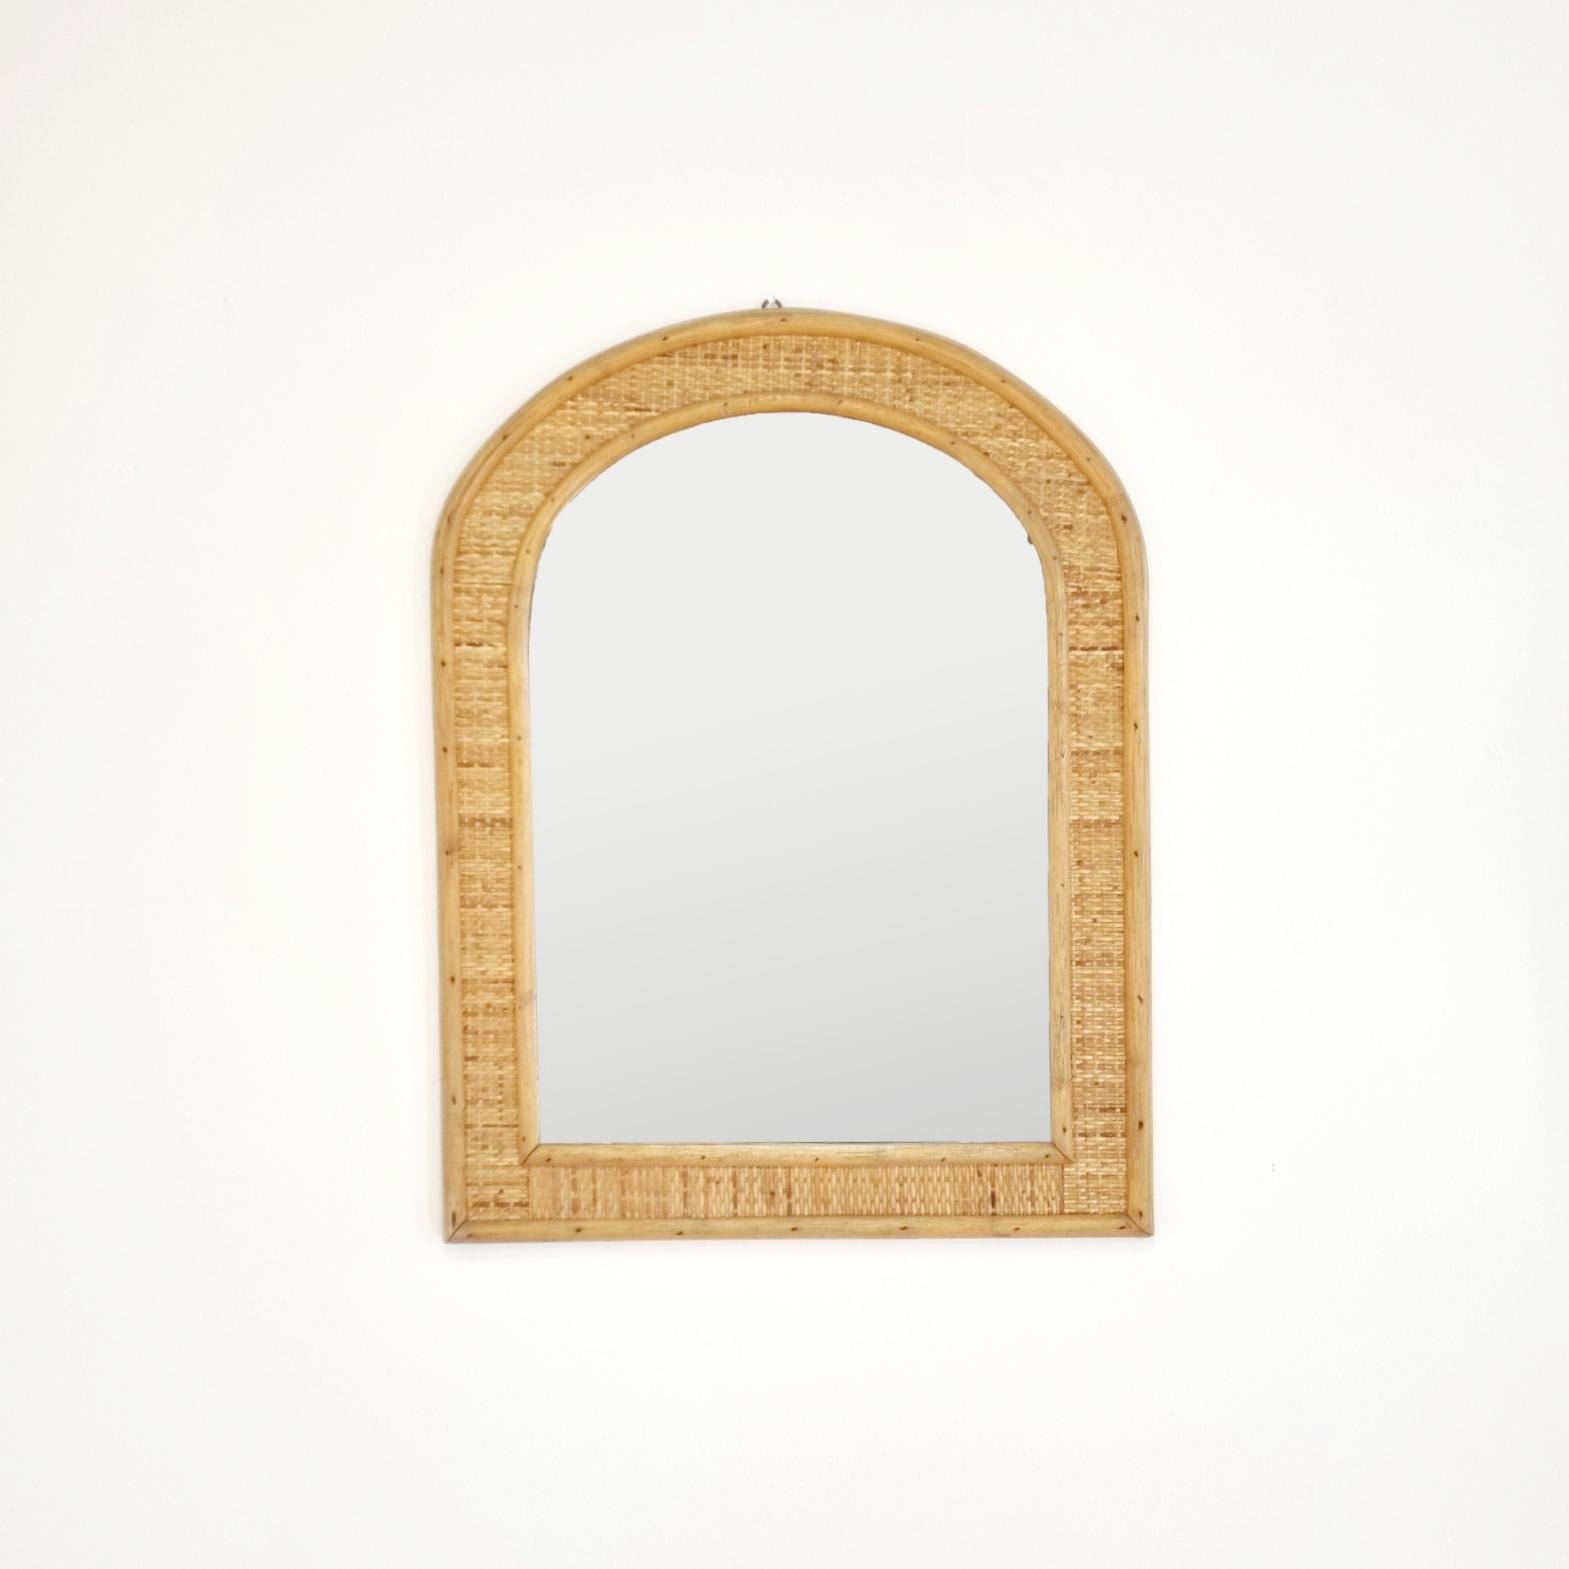 Vintage bamboo and cane mirror, made in Italy in the 70s. In very good vintage condition with light signs of wear.

Dimensions:
h 70 cm
w 55 cm
d 3 cm